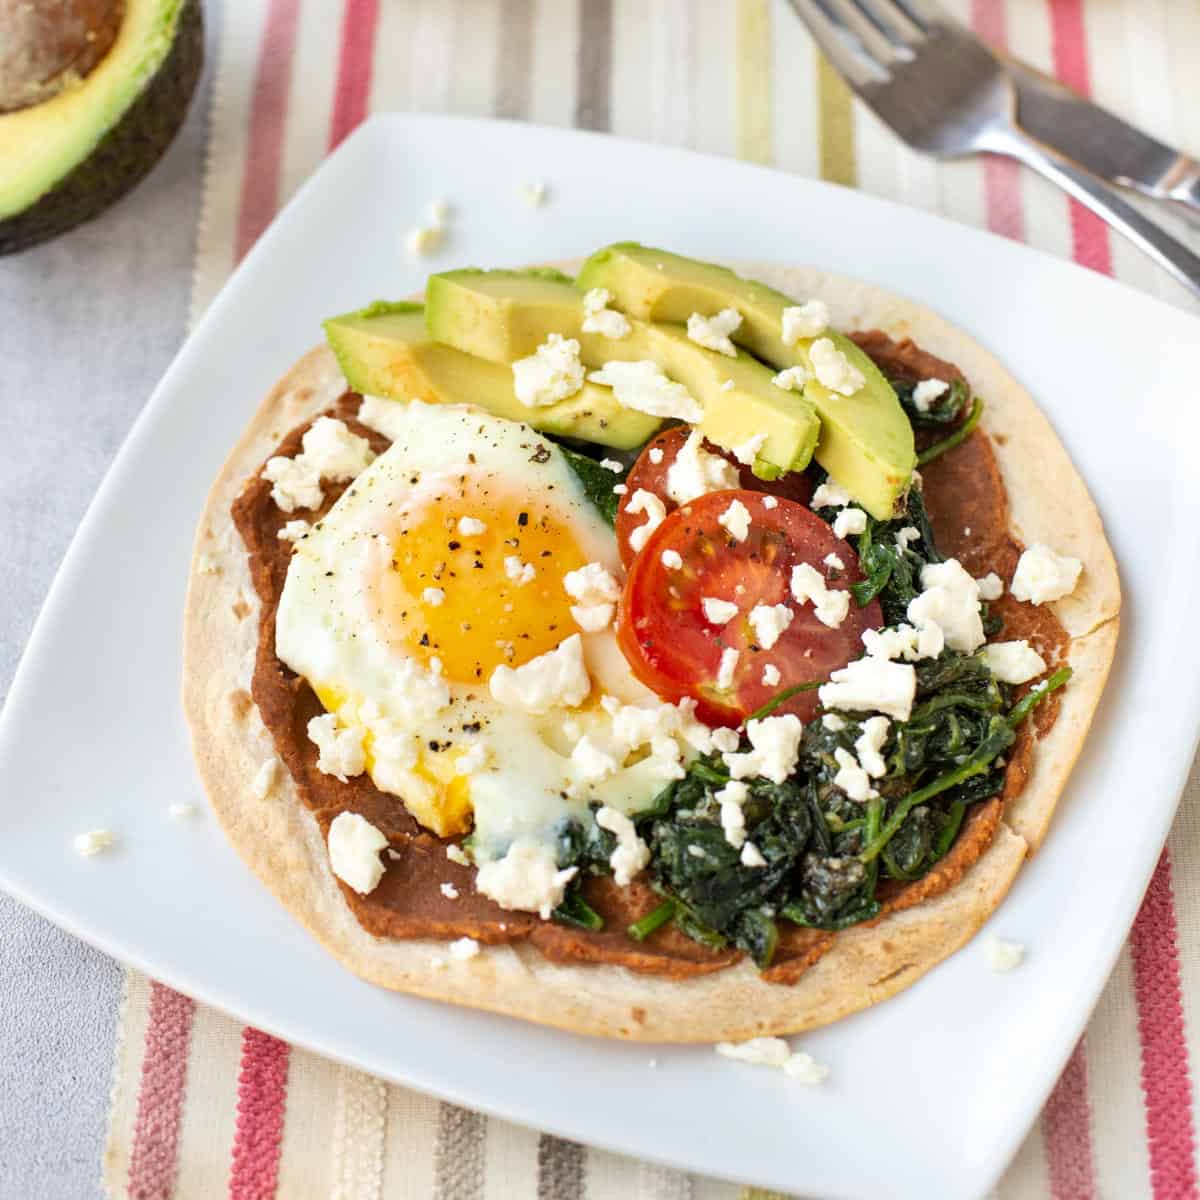 Breakfast tostada topped with a fried egg and feta cheese.